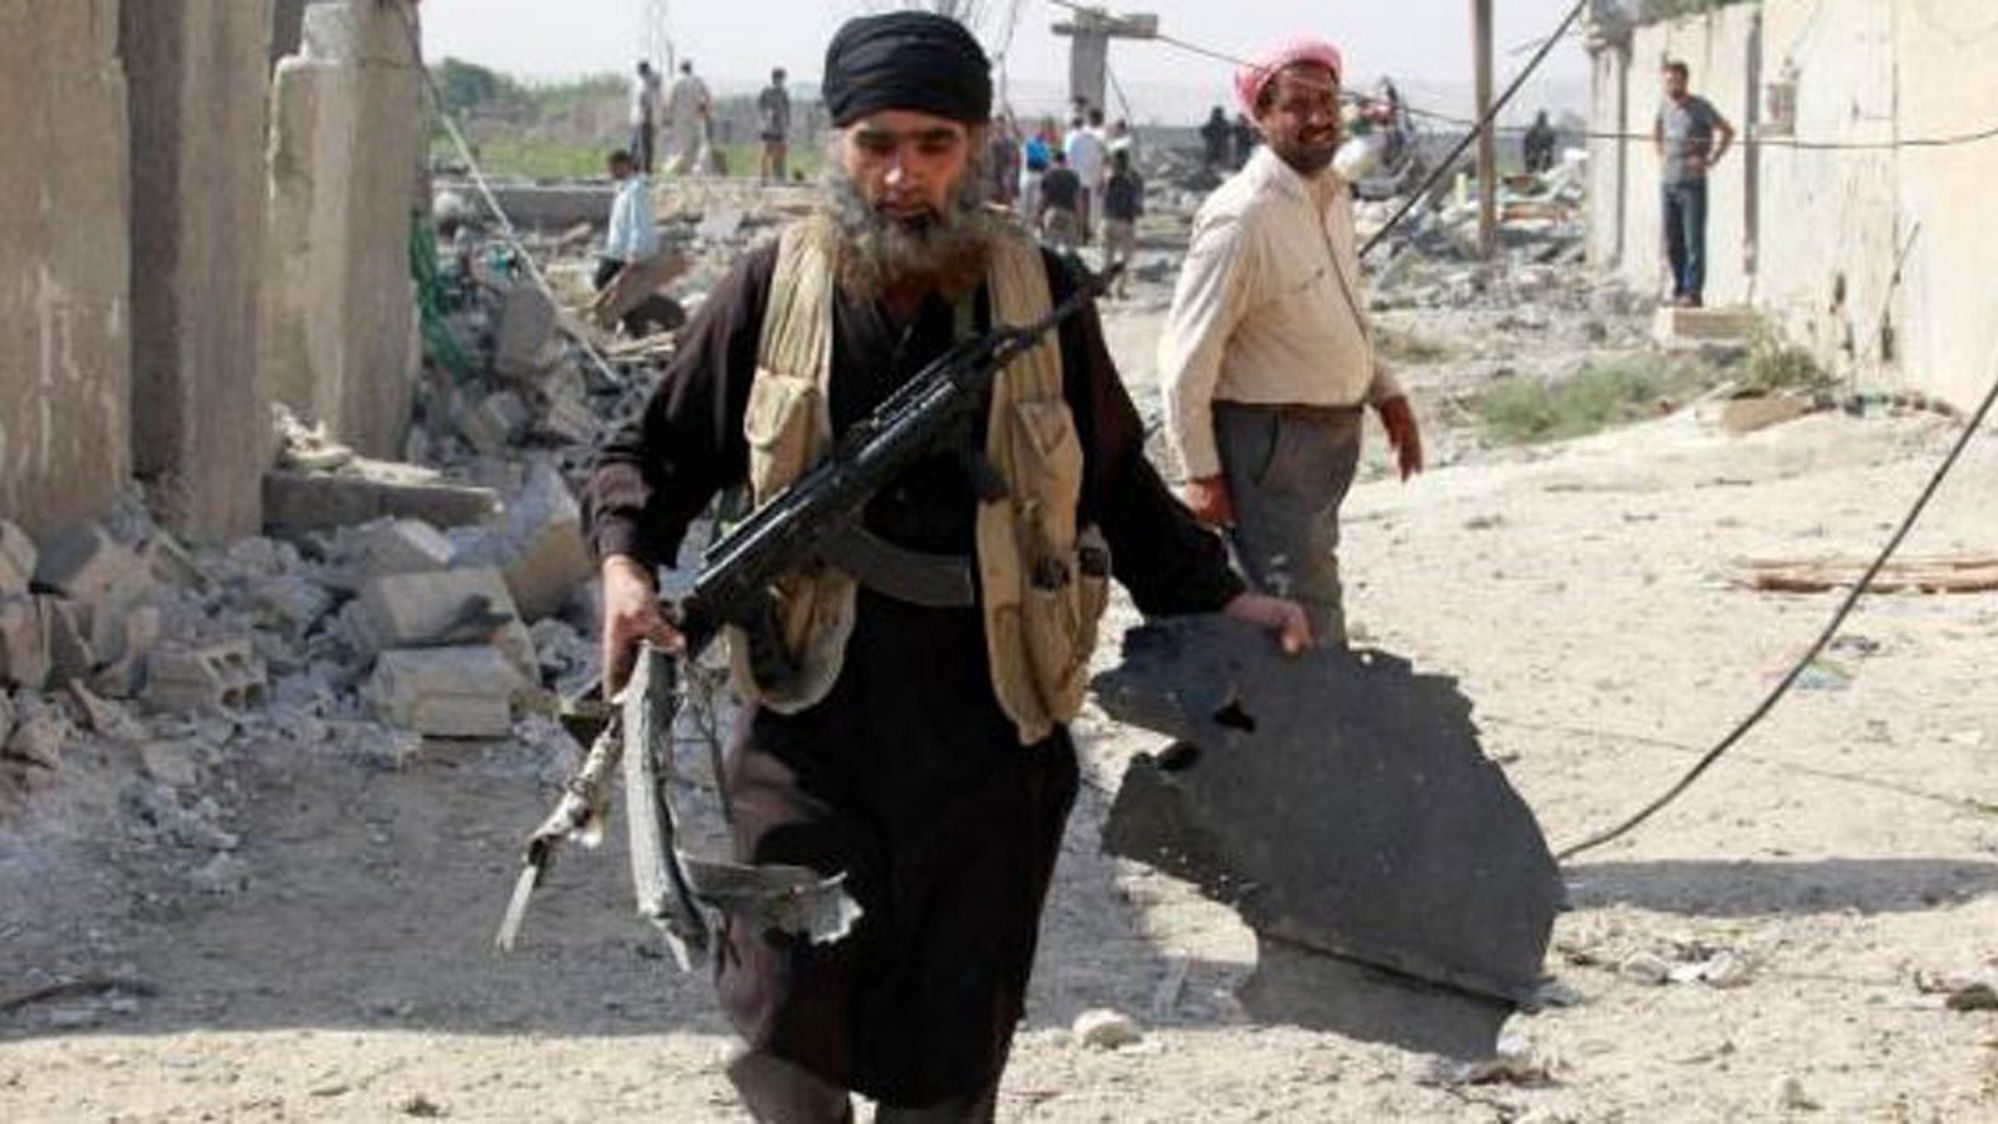 File image of an Islamic State militant.